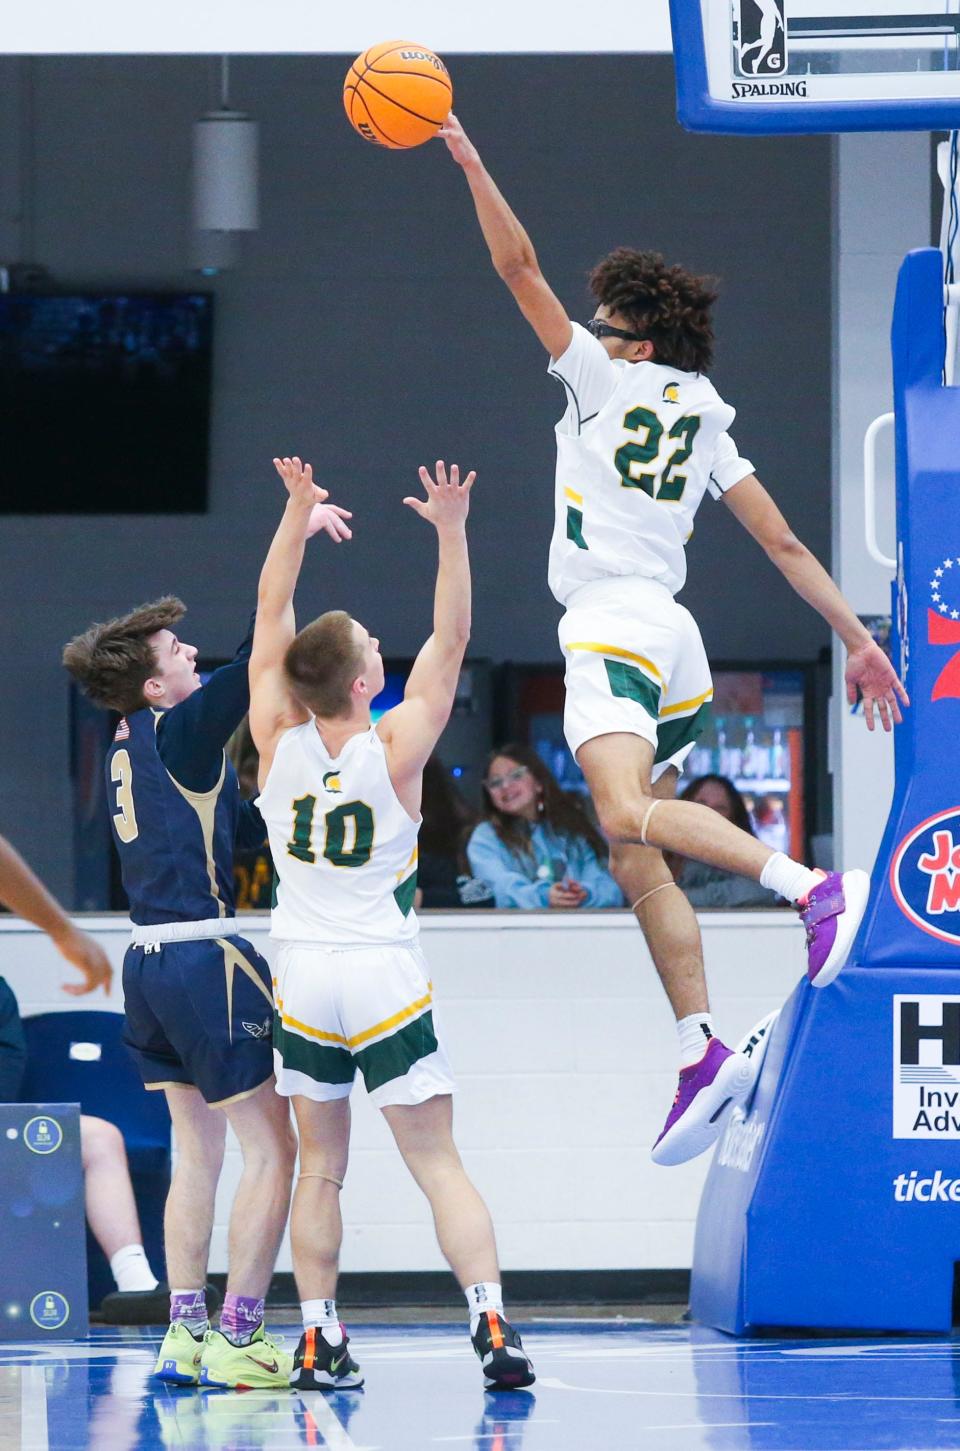 St. Mark's Jorden Jones leaps for a block against Delaware Military's Gabriel Swift (3) in the second half of St. Mark's 59-50 win in the Fifth Annual SL24 Memorial Classic, Friday, Feb. 3, 2023 at the Chase Fieldhouse. The seven-game, two-day fundraiser for the SL24: UnLocke the Light foundation continues Saturday.